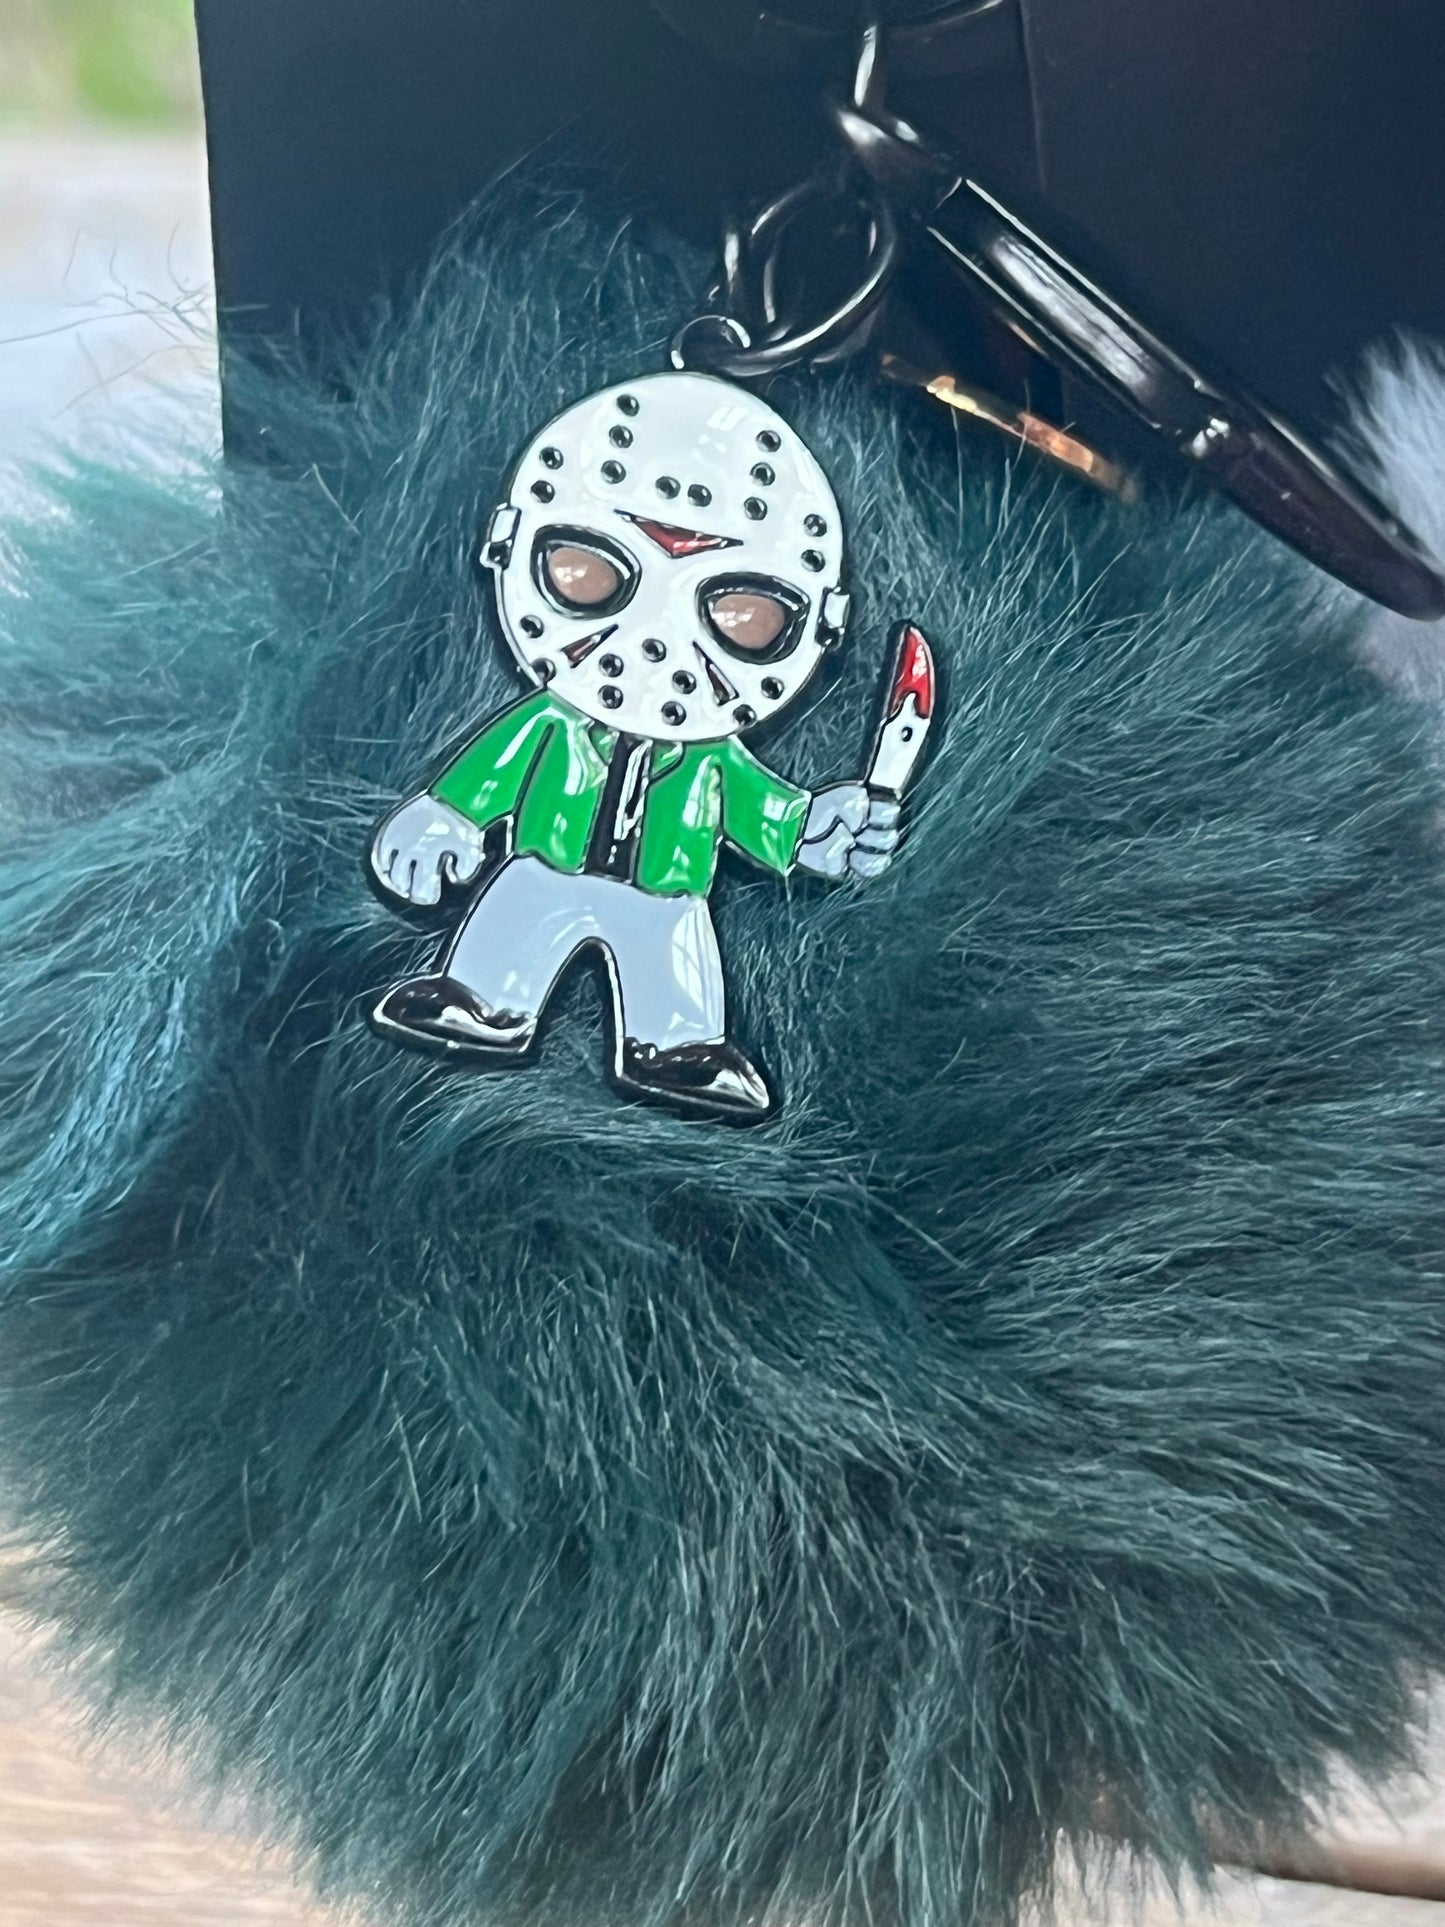 Horror Movie Keychain with Pompom and Spooky Charms